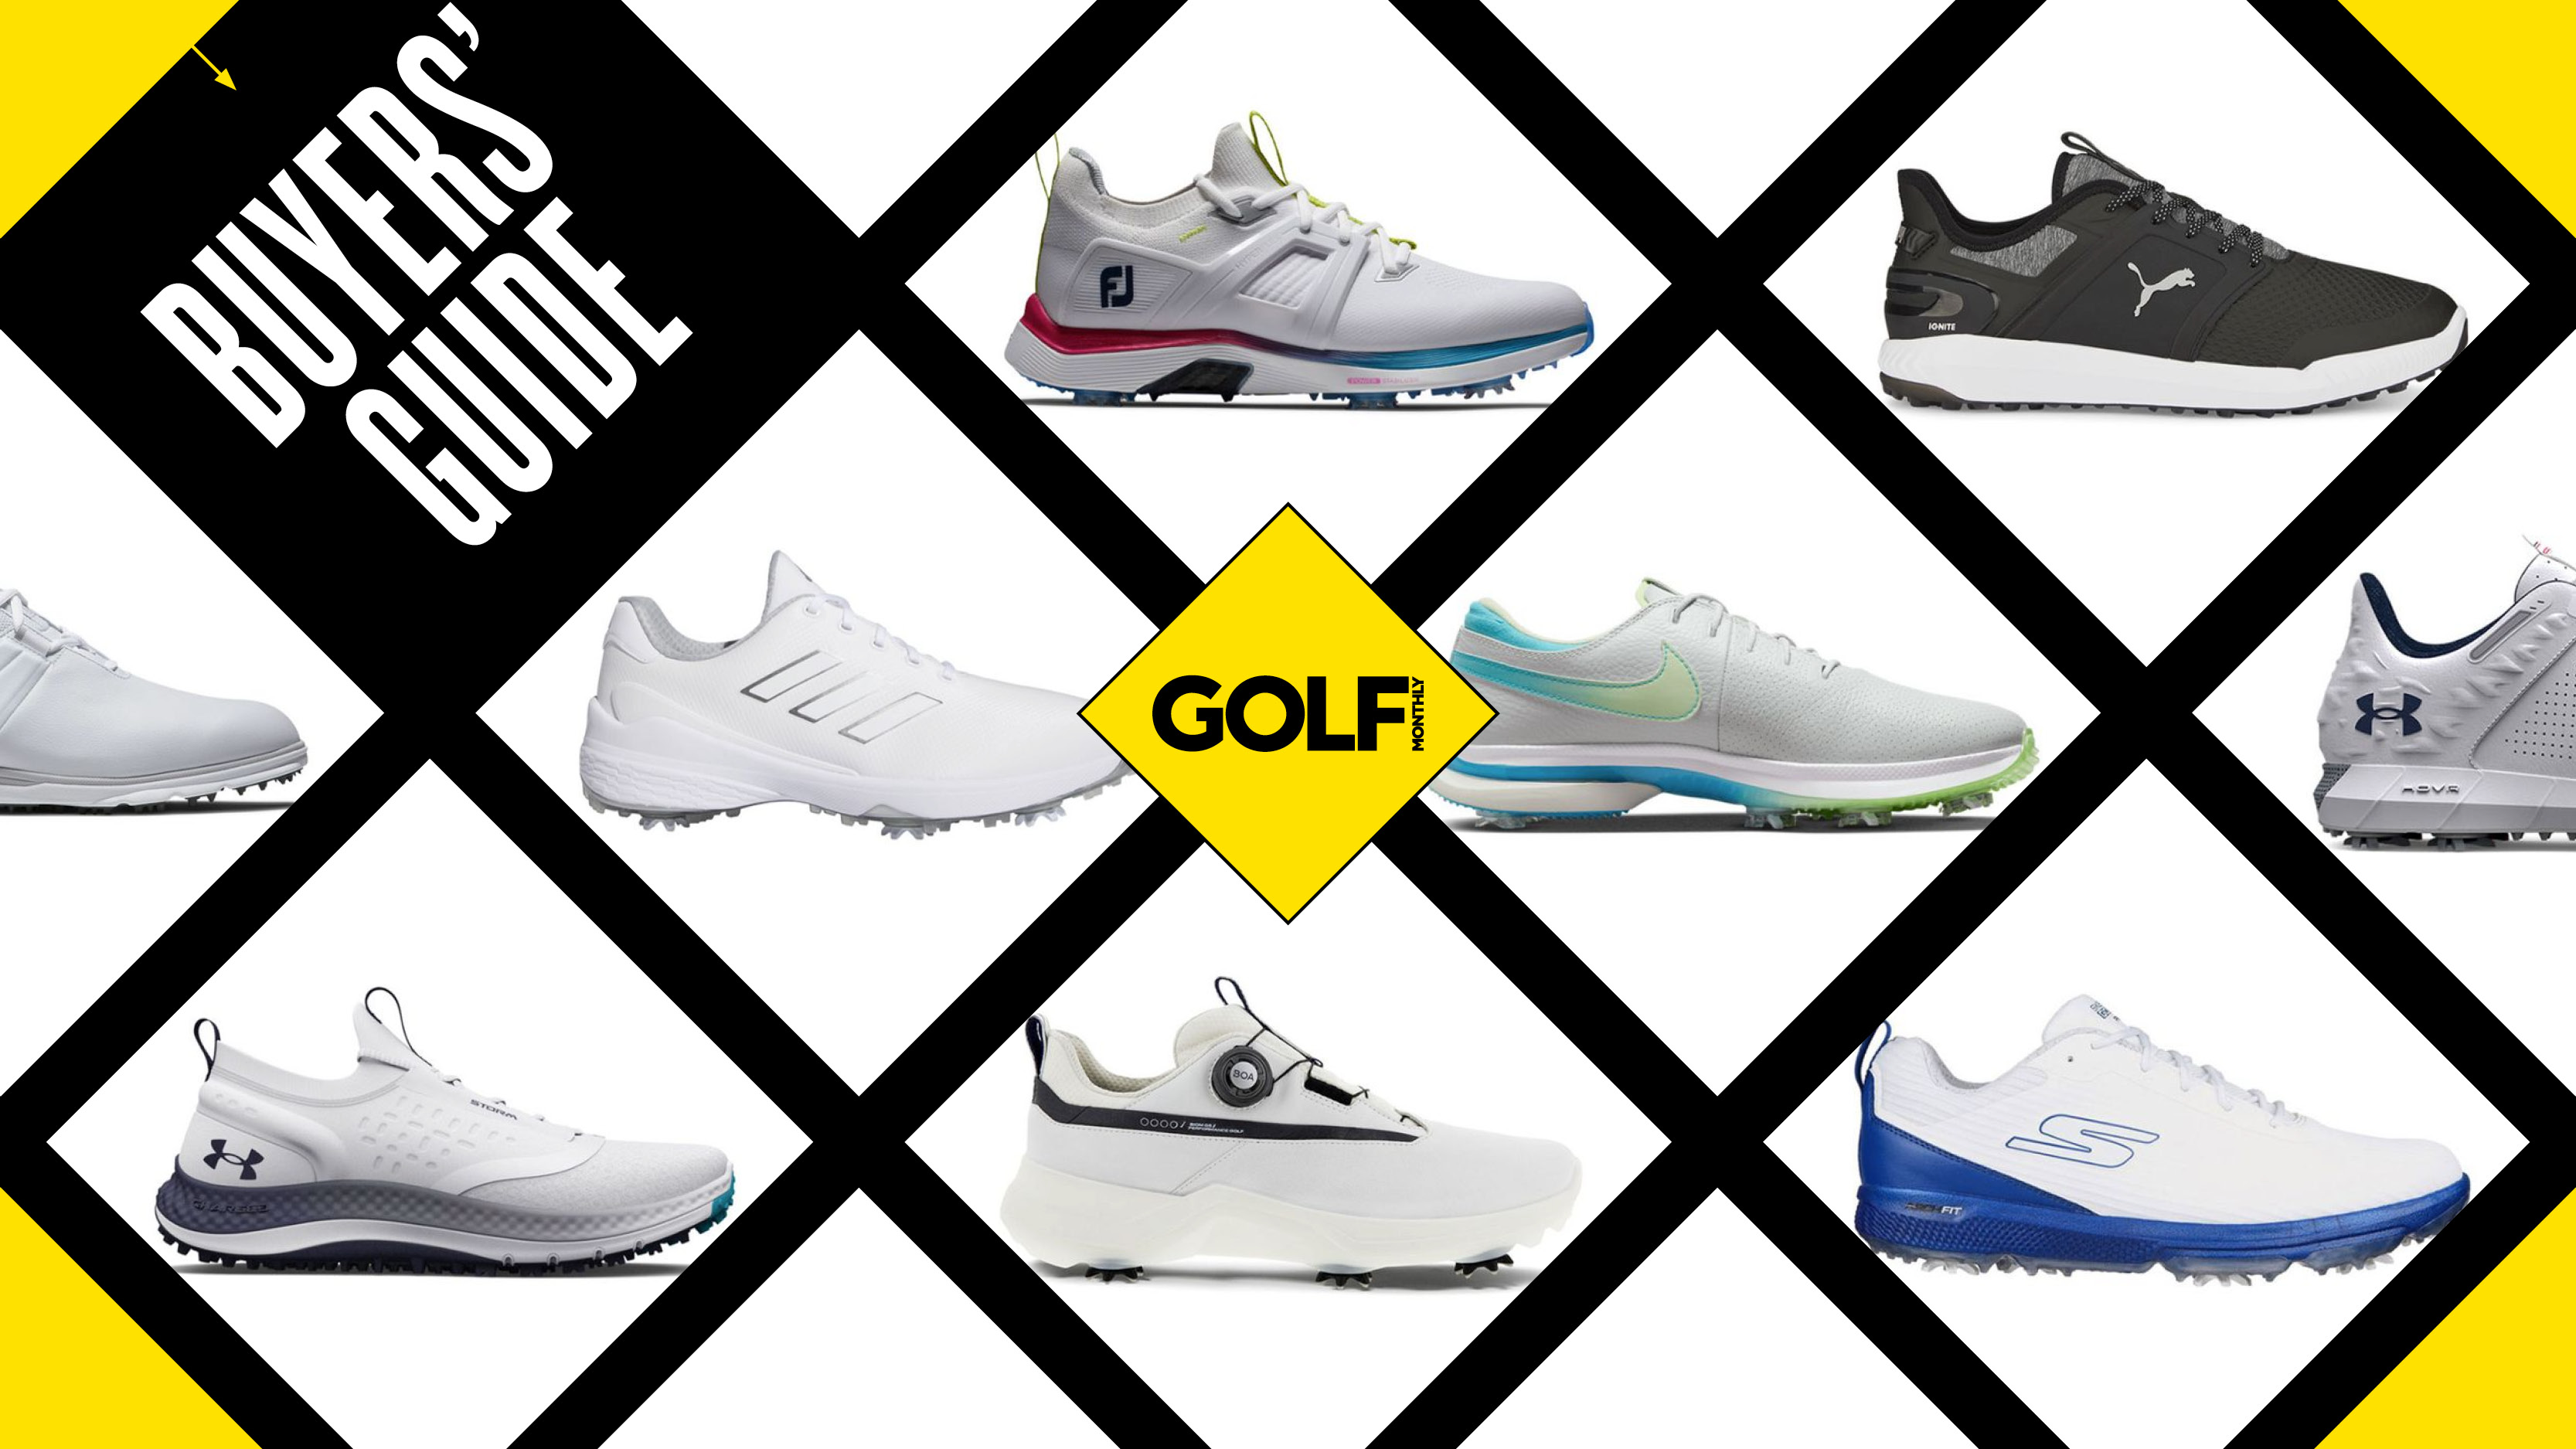 9 golf joggers we love: GOLF 2020 Fall Style Guide